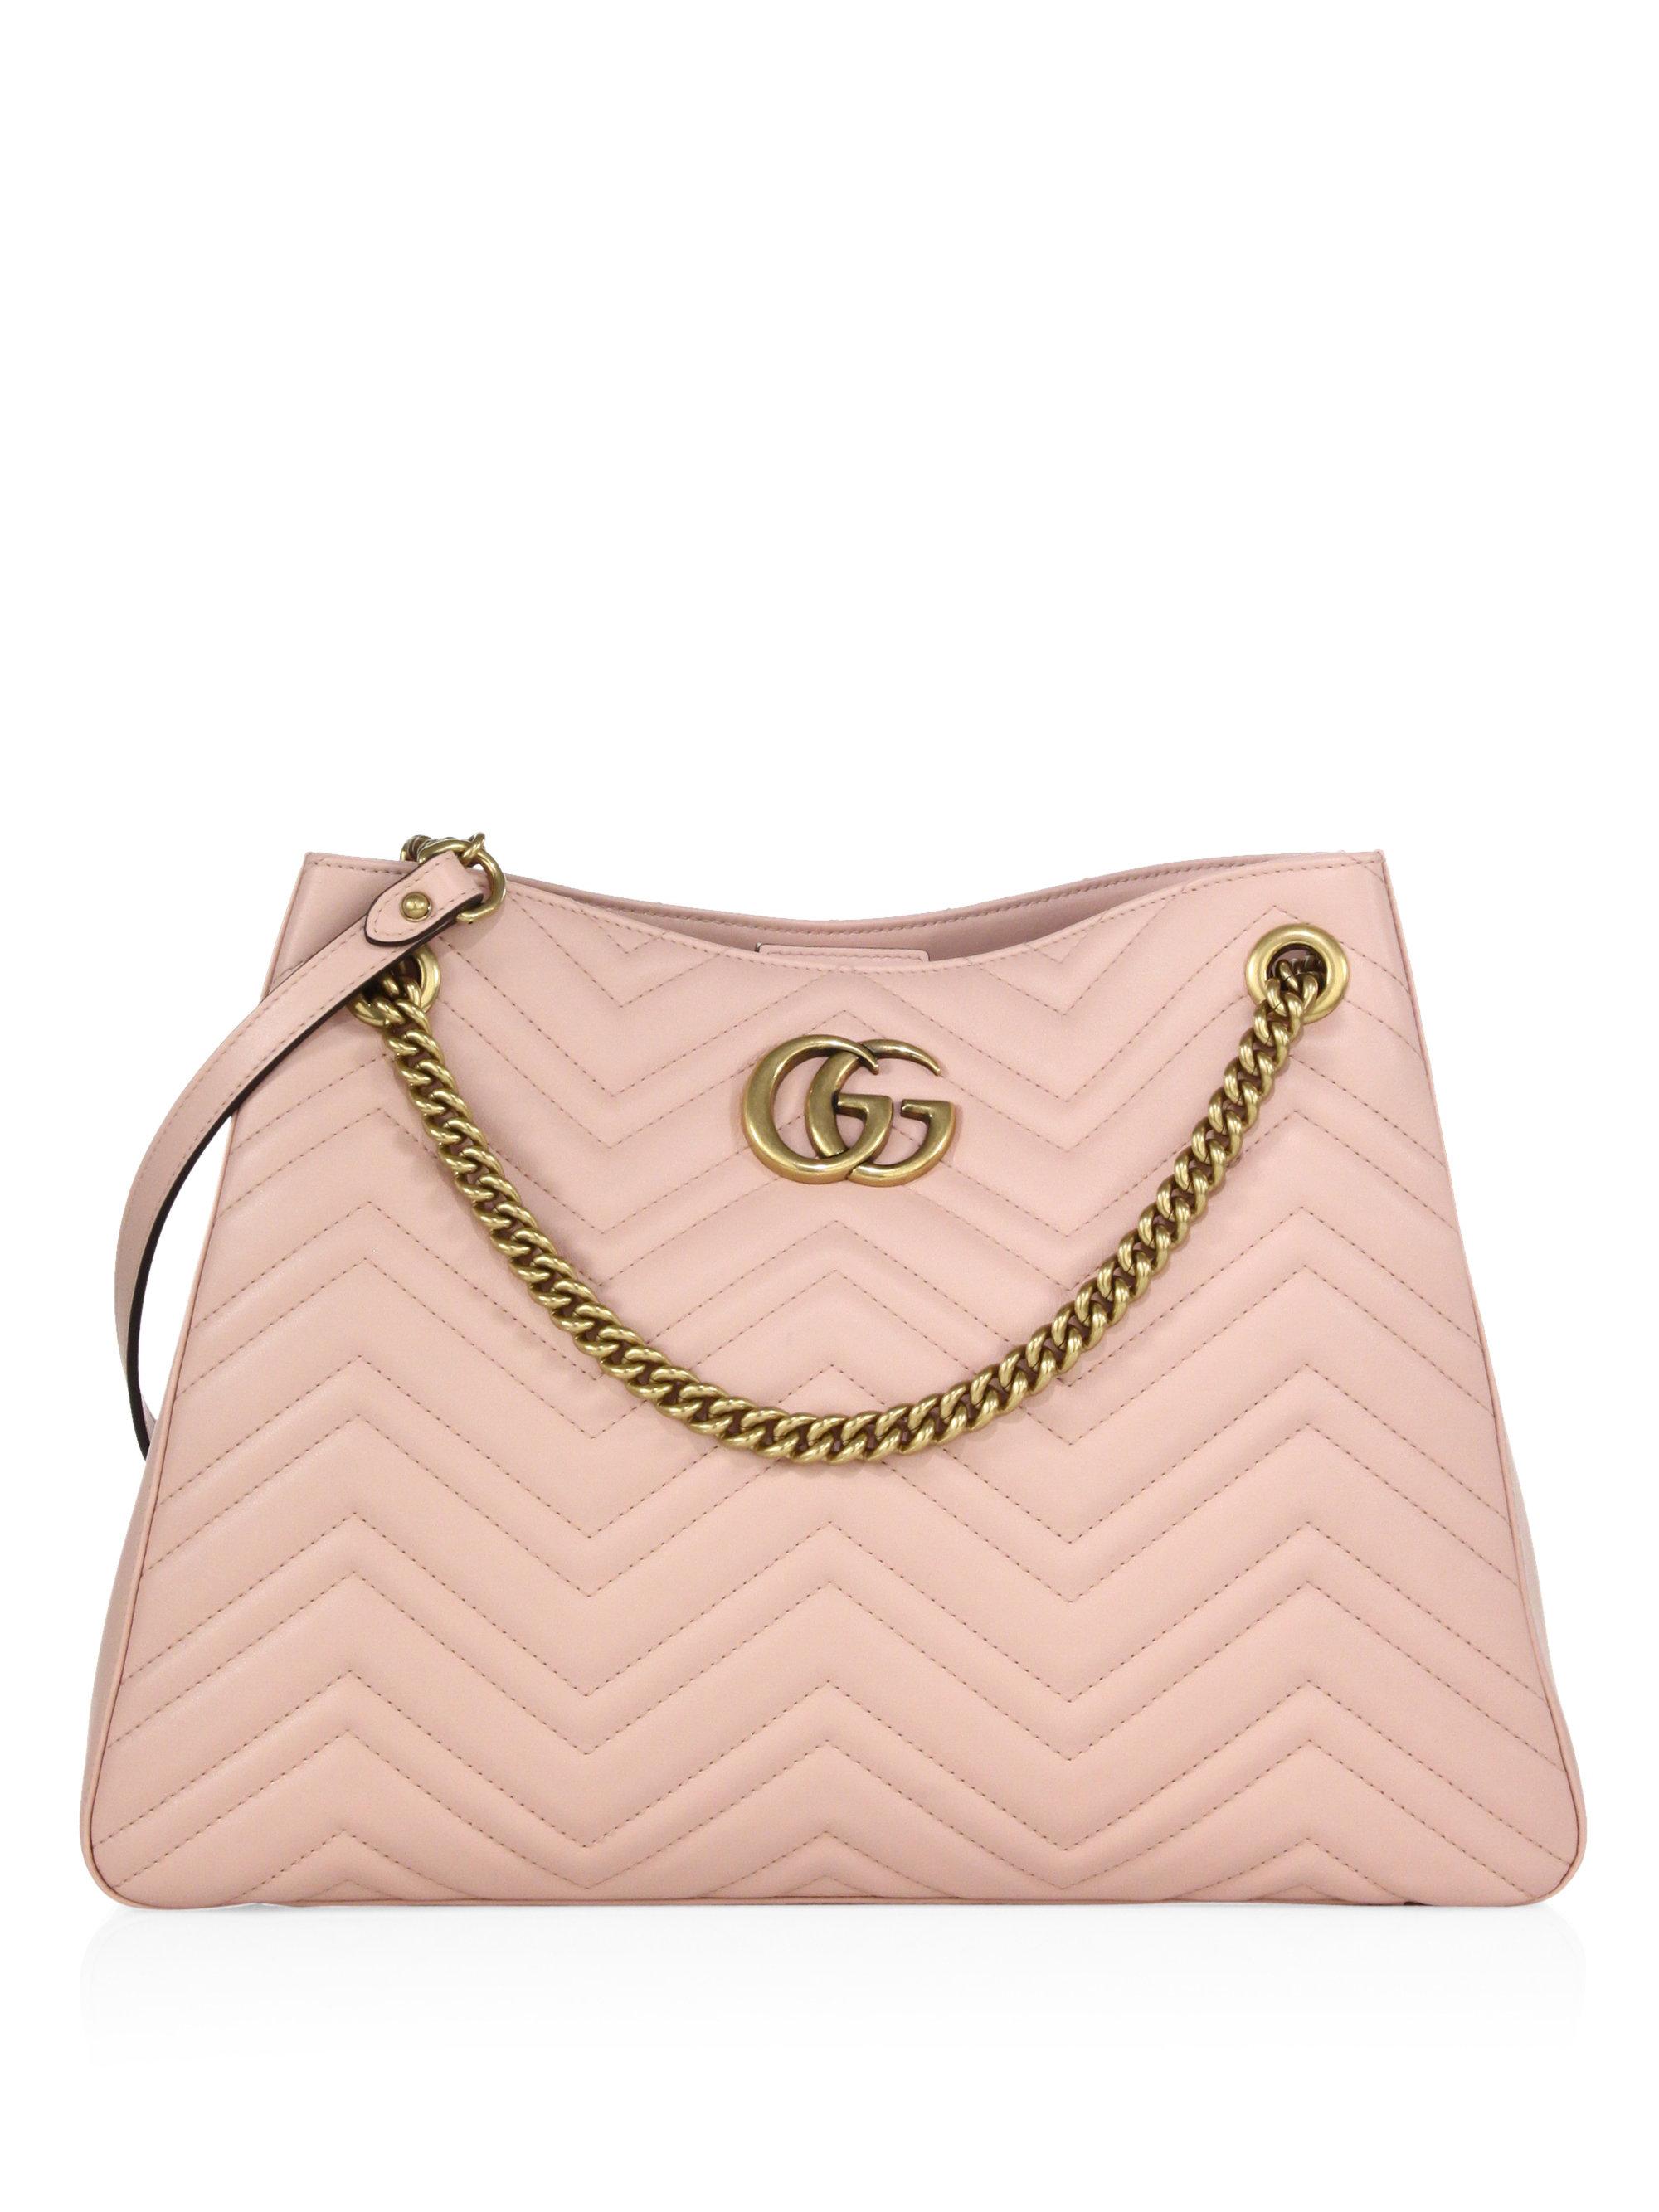 Gucci Gg Marmont Matelasse Leather Shoulder Bag in Pink | Lyst